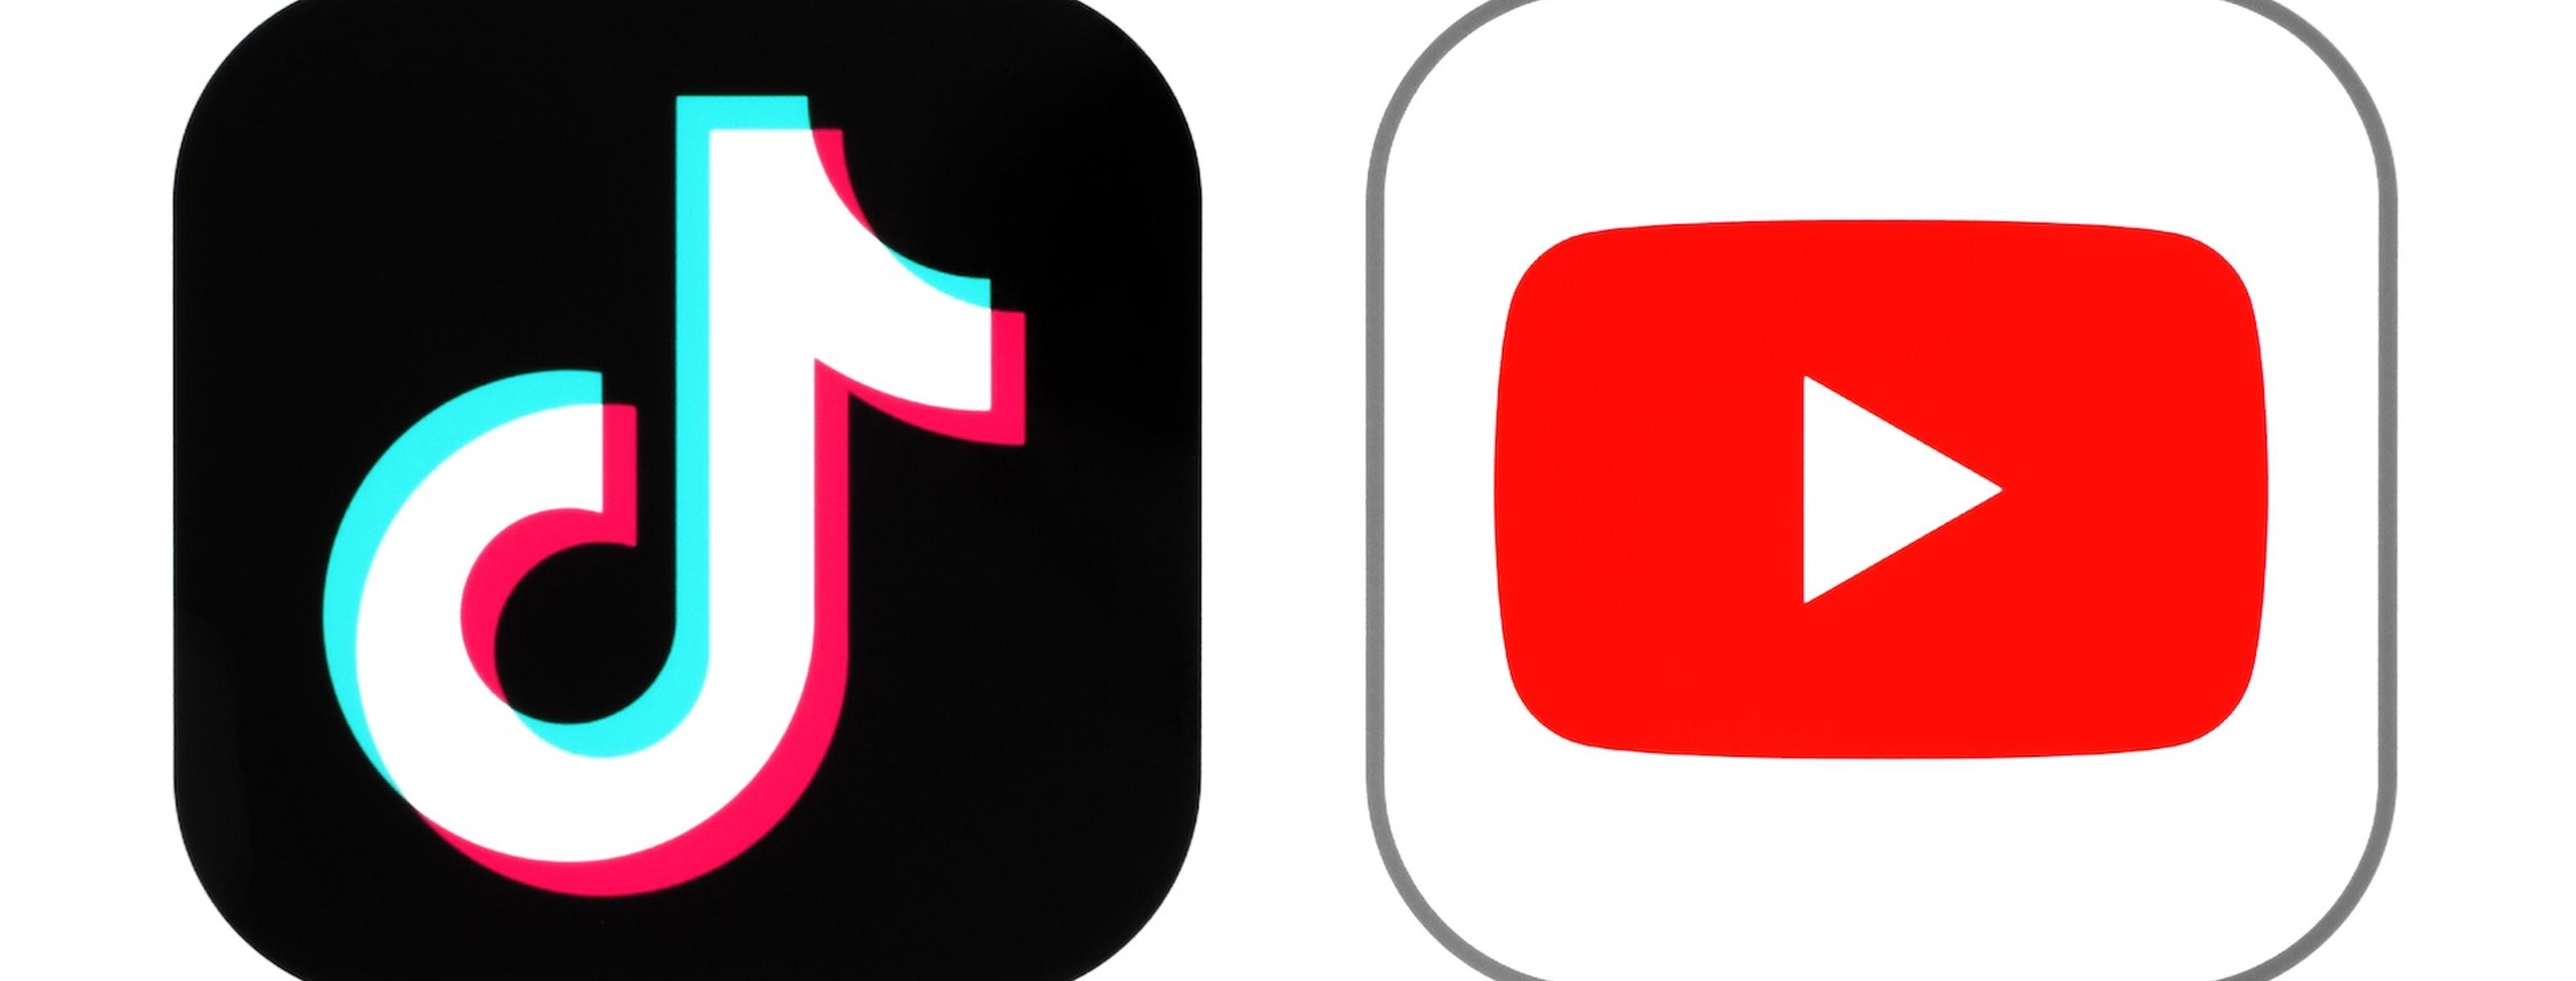 order stuff online for 1 cents｜TikTok Search